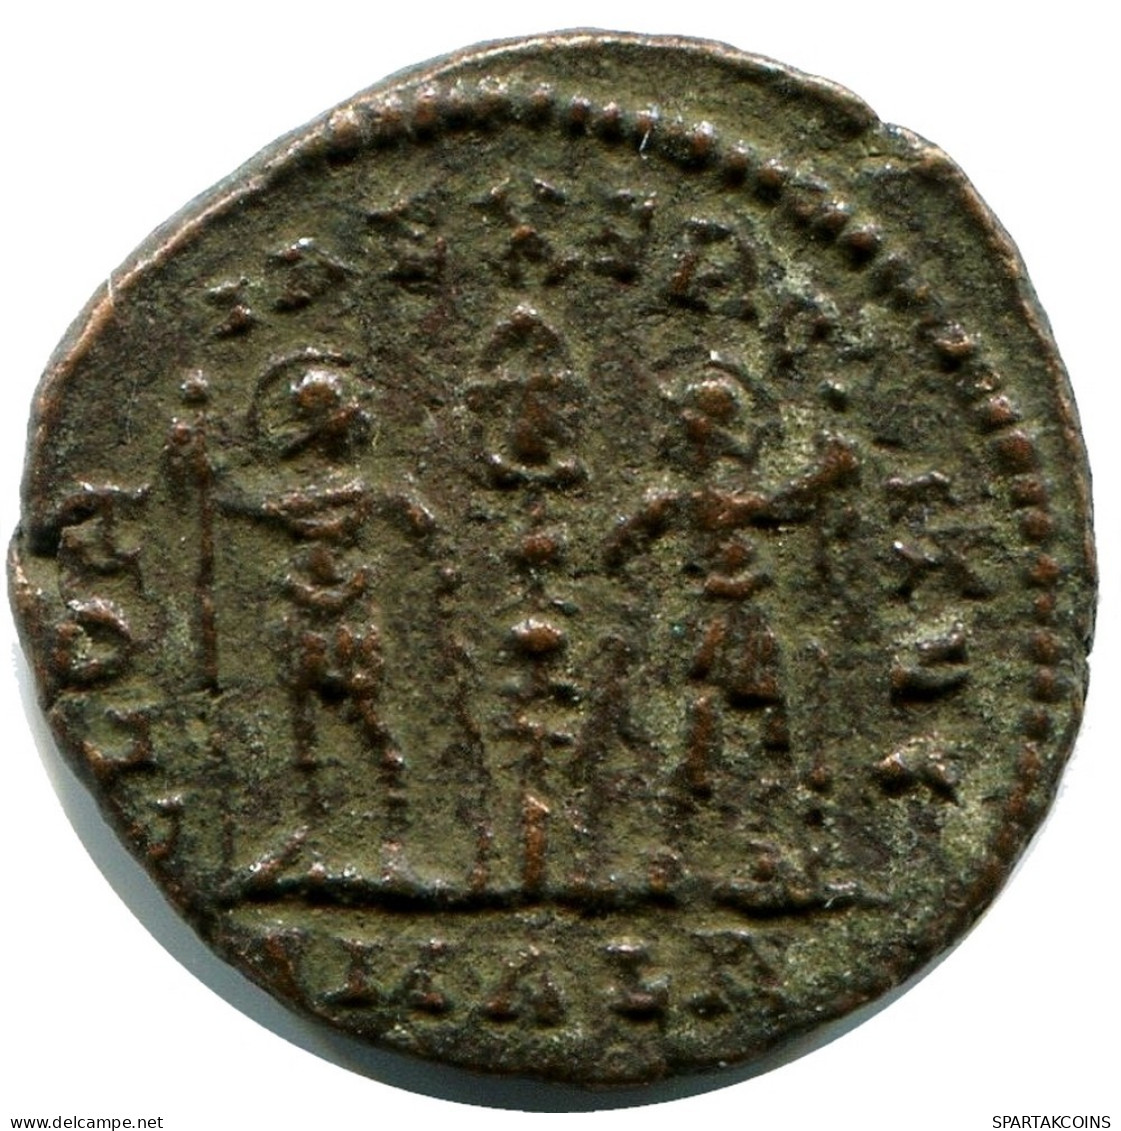 CONSTANS MINTED IN ALEKSANDRIA FOUND IN IHNASYAH HOARD EGYPT #ANC11364.14.D.A - El Imperio Christiano (307 / 363)